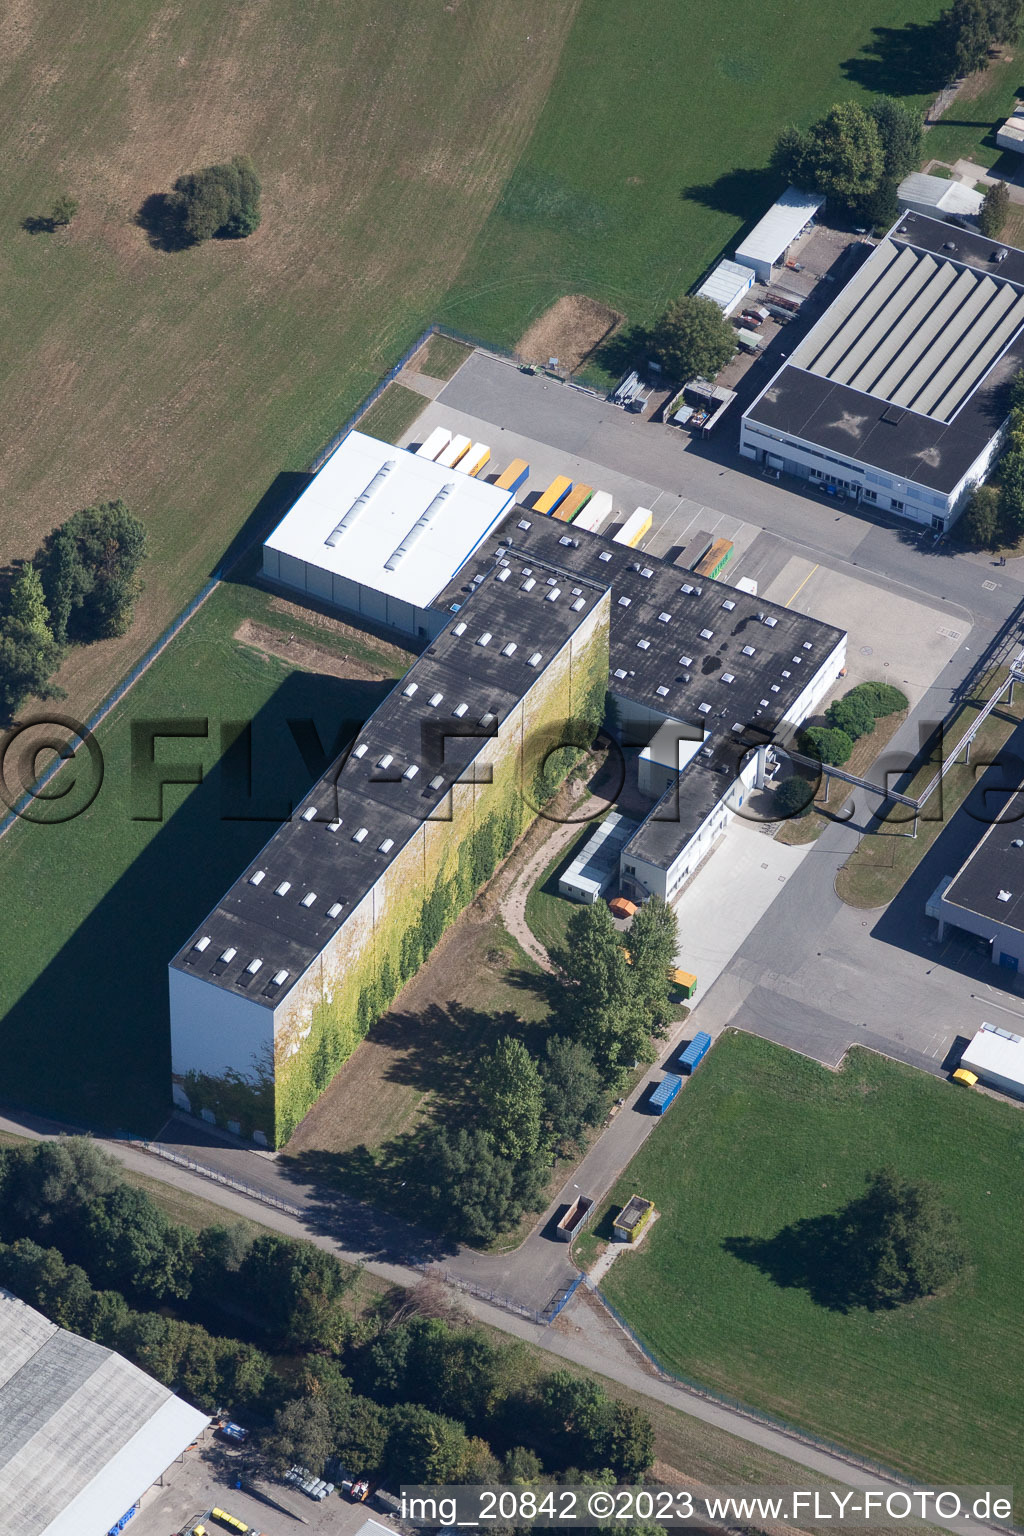 Tesa works in Offenburg in the state Baden-Wuerttemberg, Germany